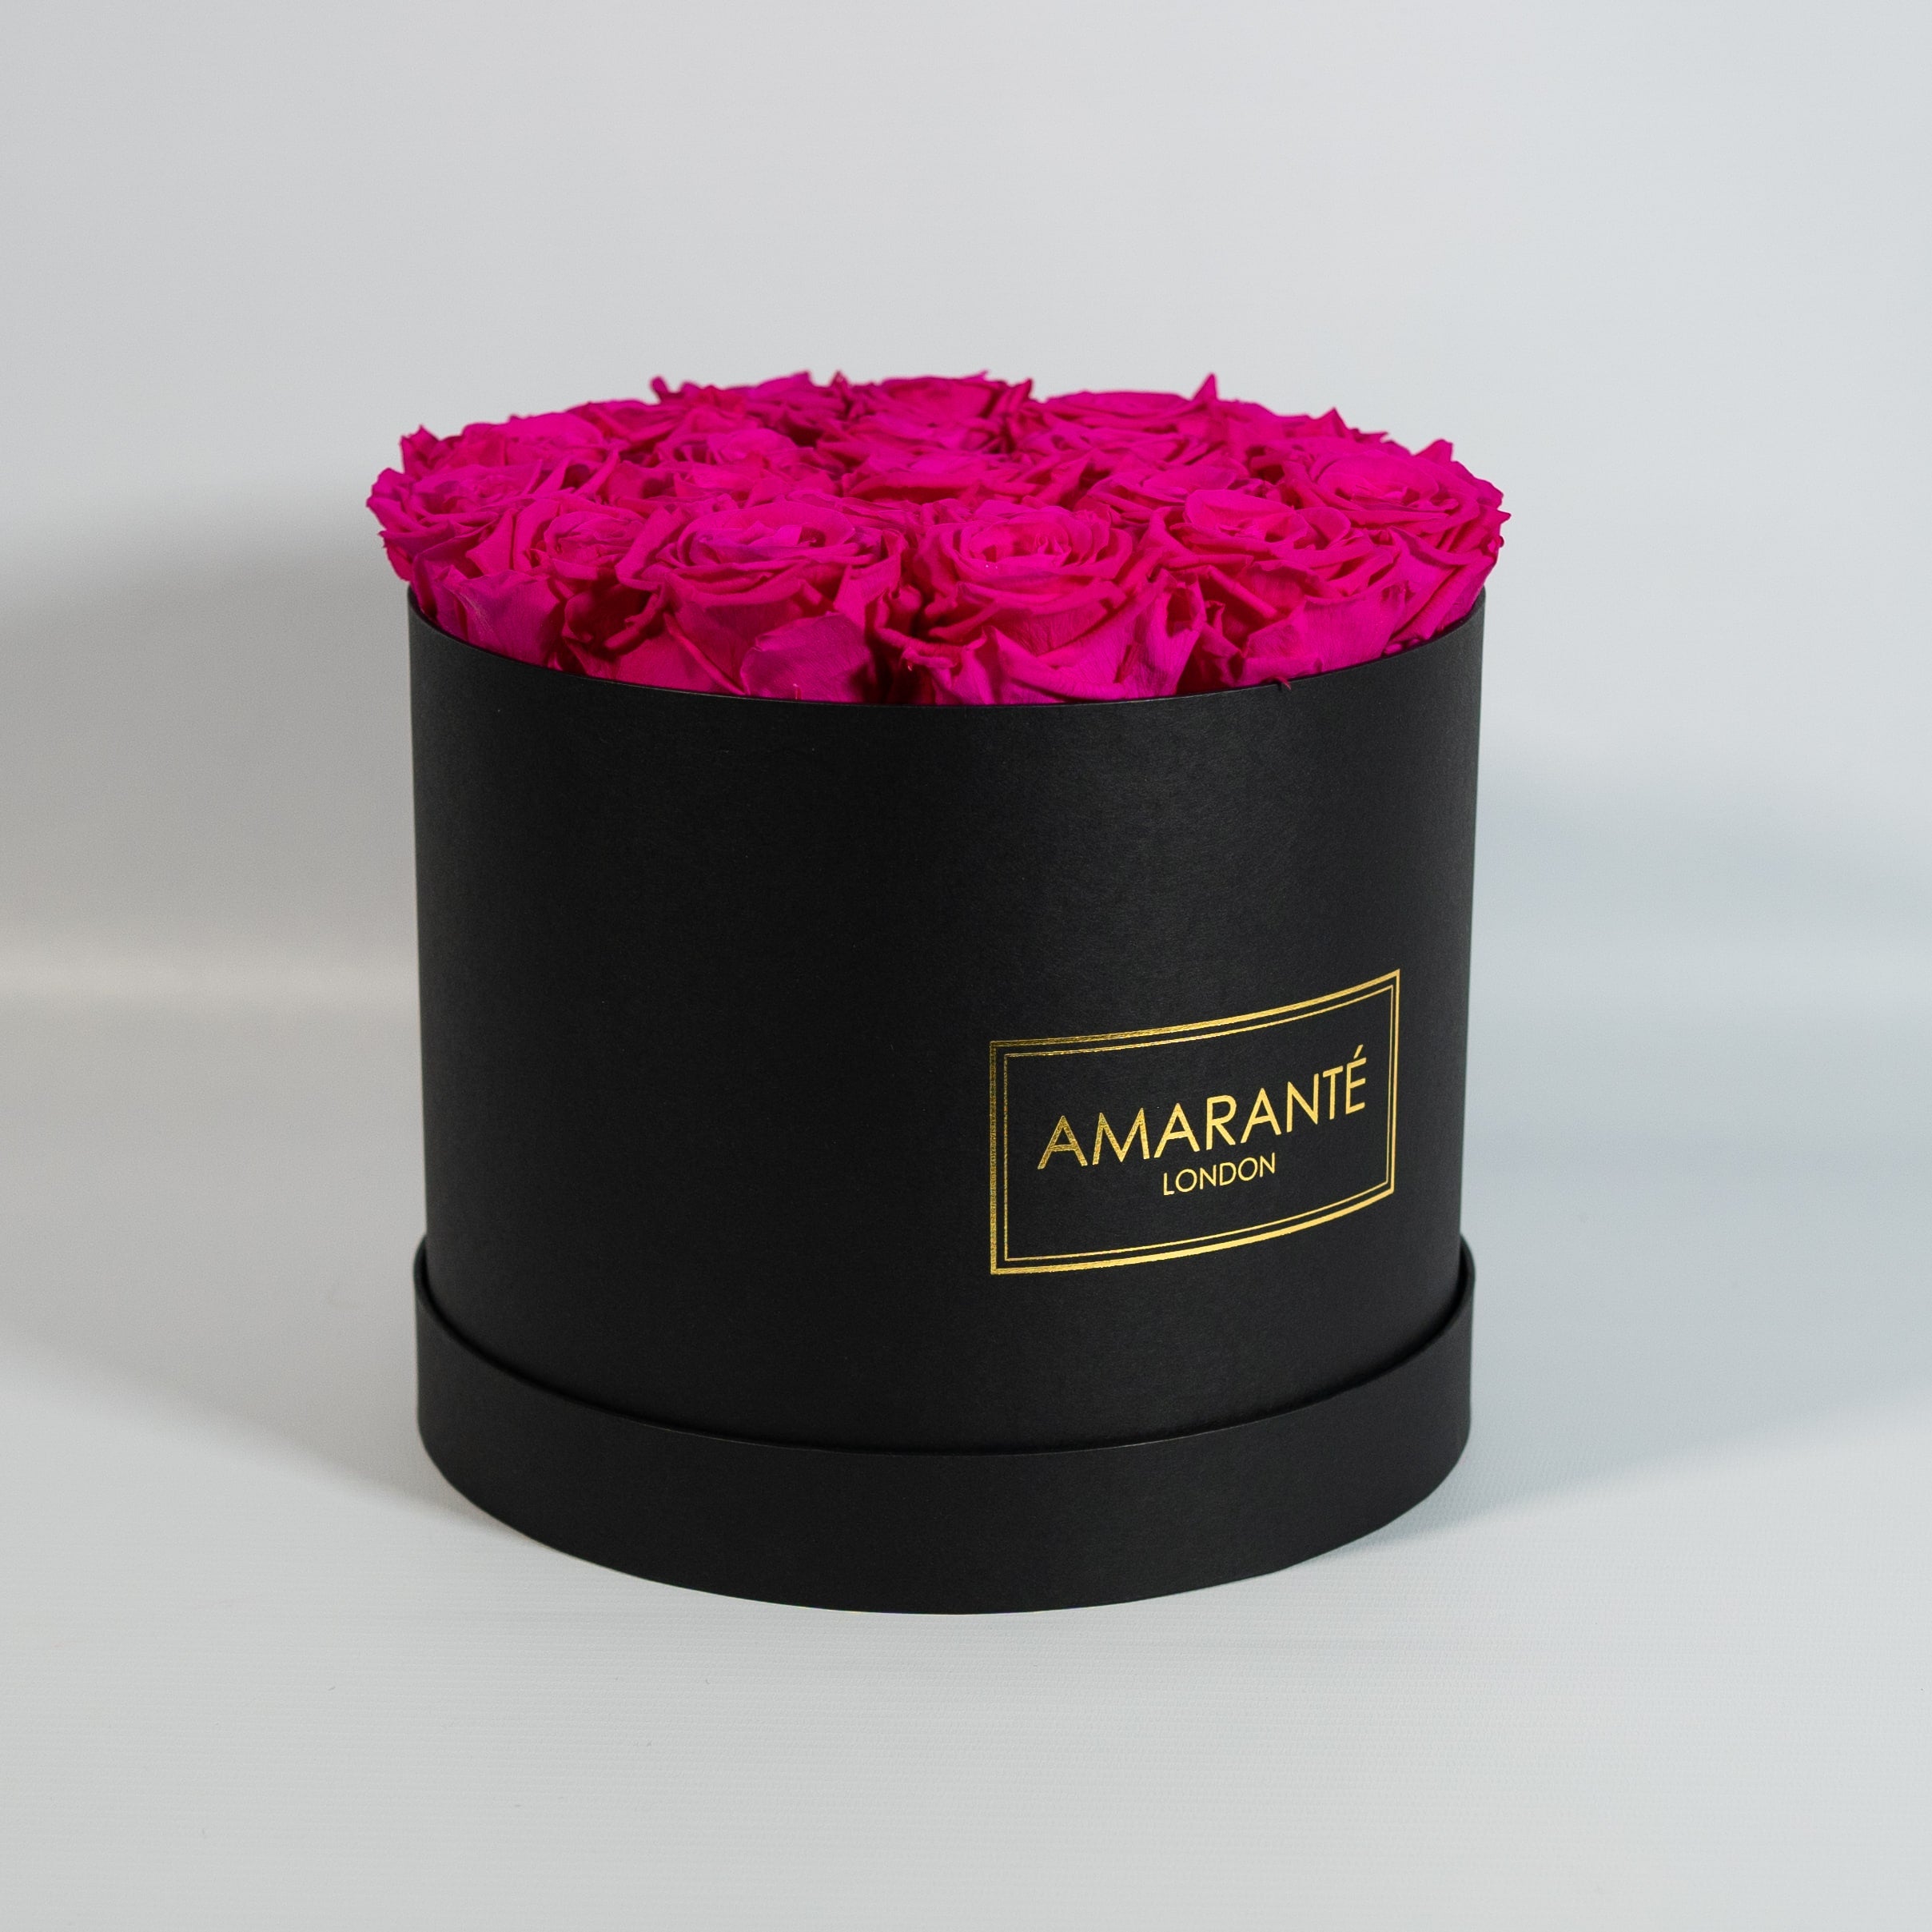 Festive hot pink Roses in a groovy black box 